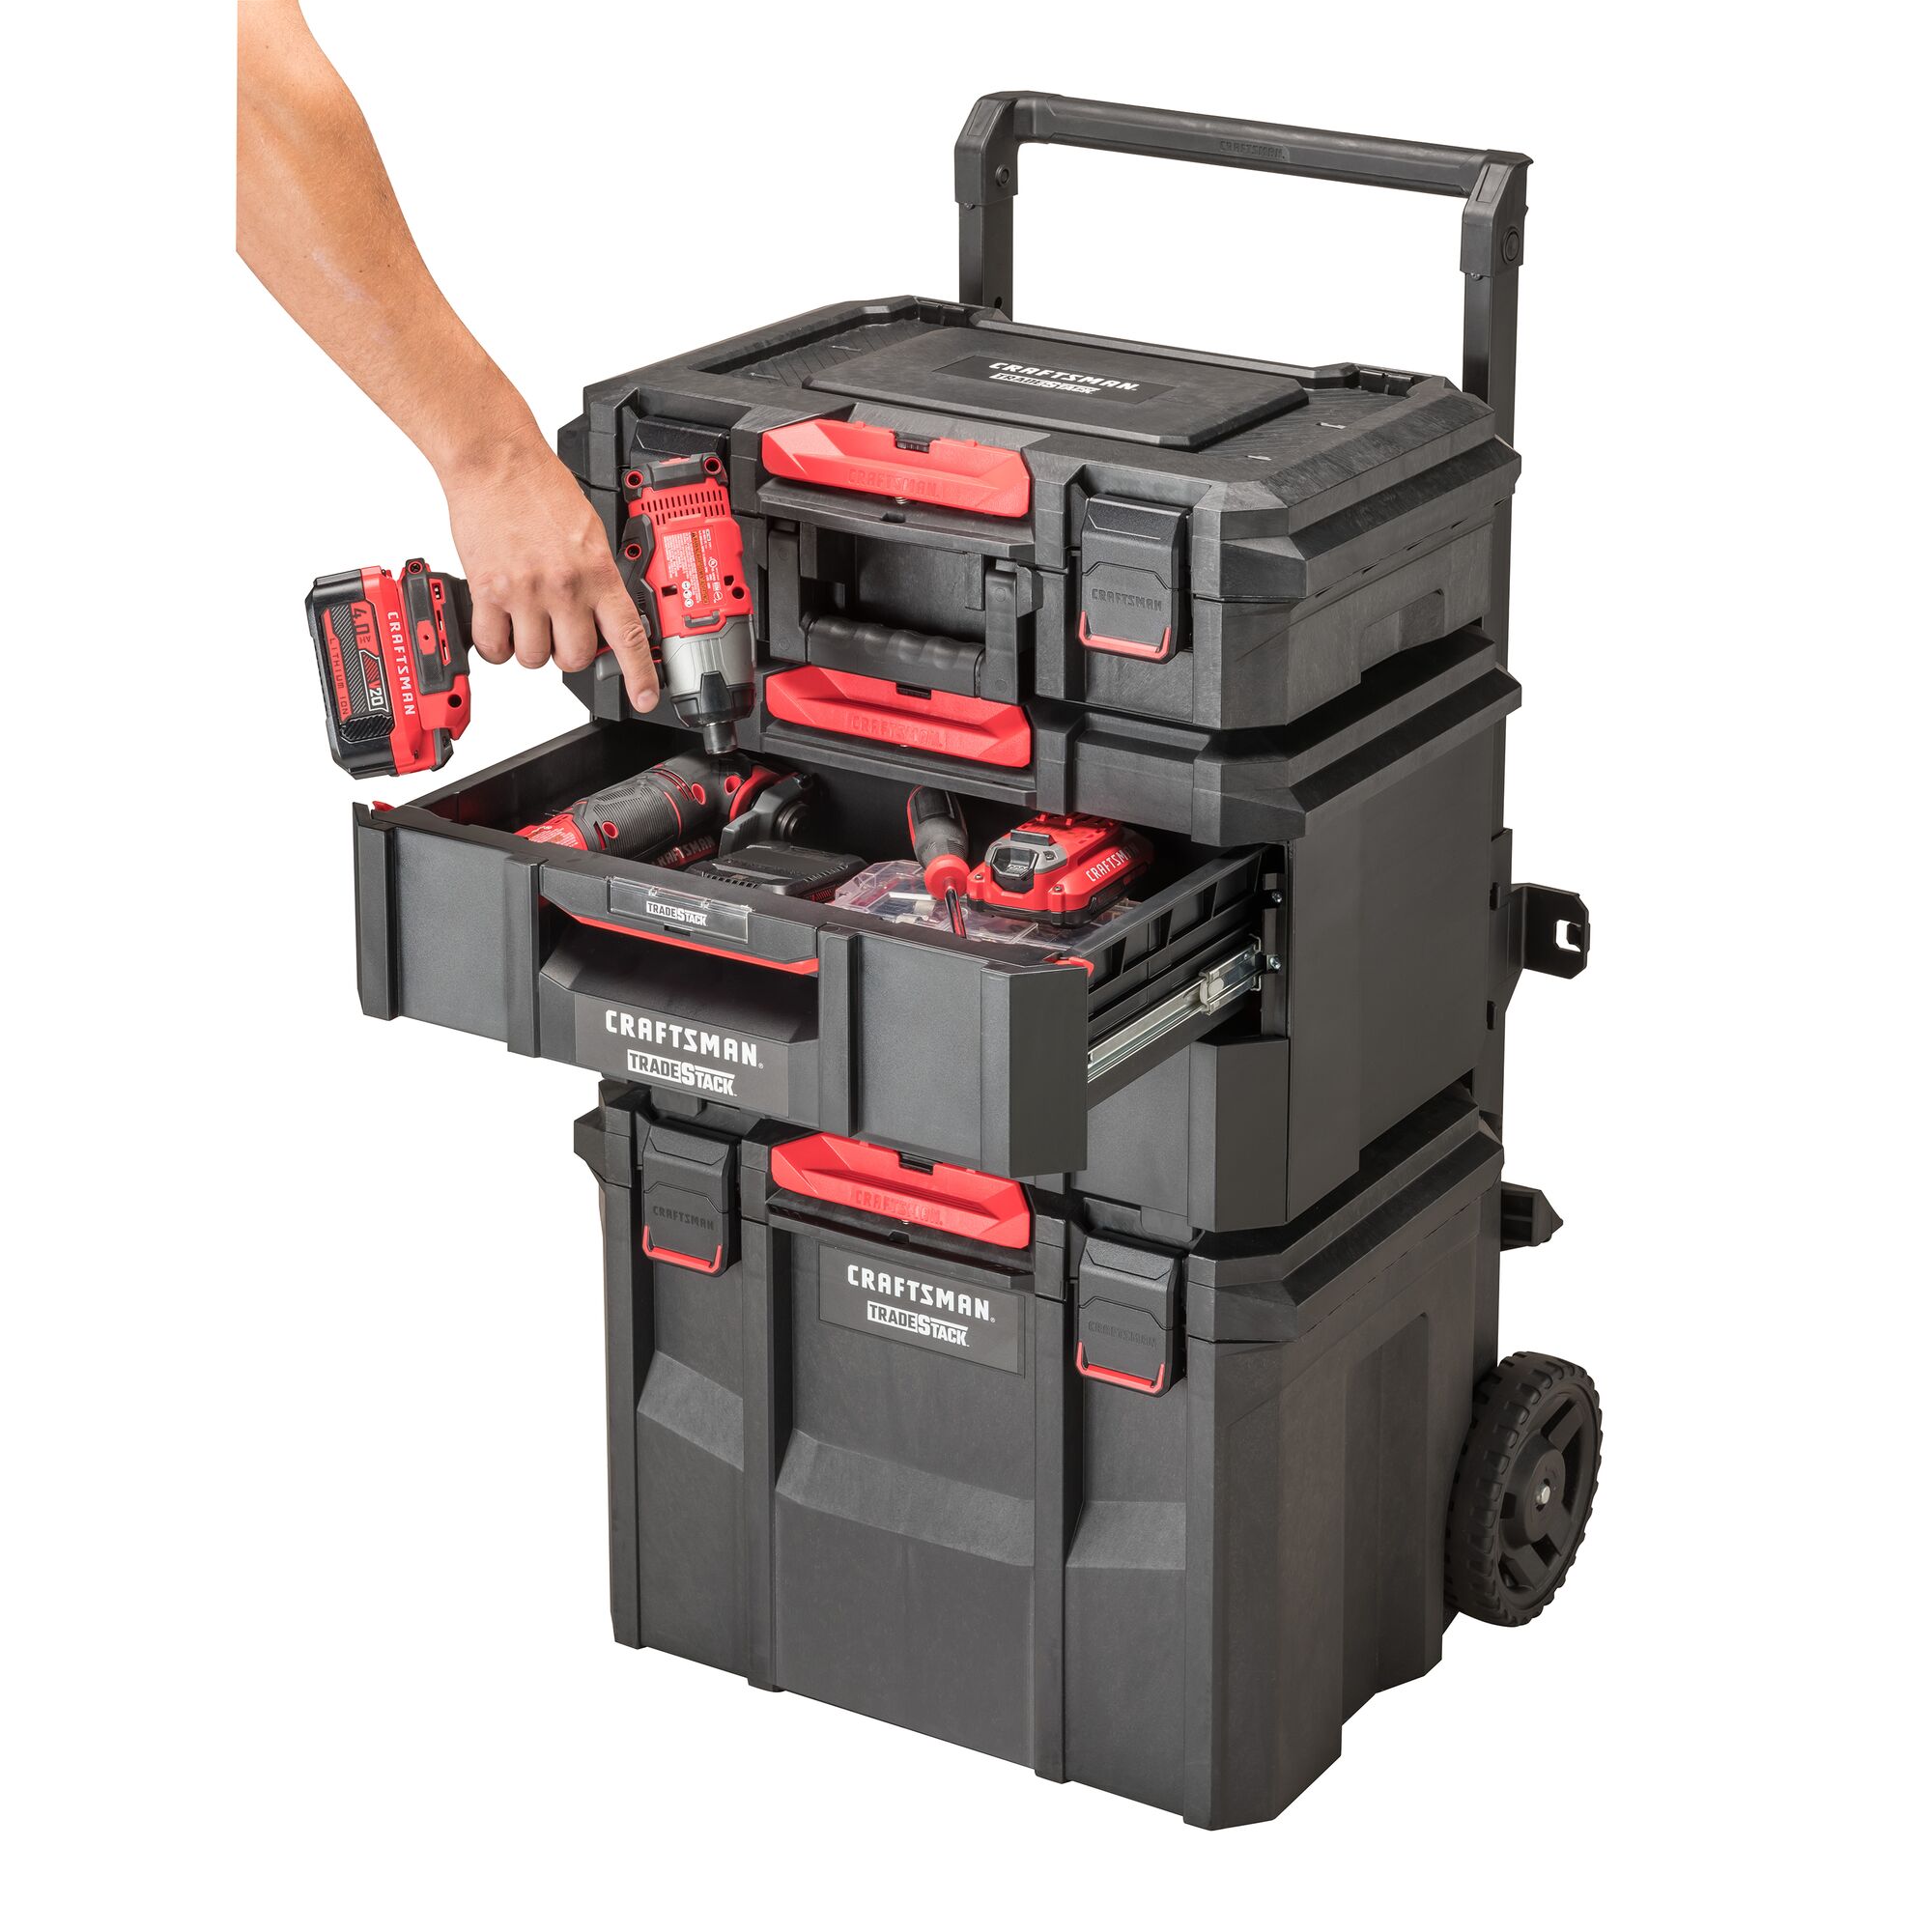 CRAFTSMAN TRADESTACK 2-Drawer Unit placed in the middle of a TRADESTACK Tower, between a TRADESTACK Rolling Unit and TRADESTACK Suitcase, with hand placing CRAFTSMAN impact driver into opened top drawer